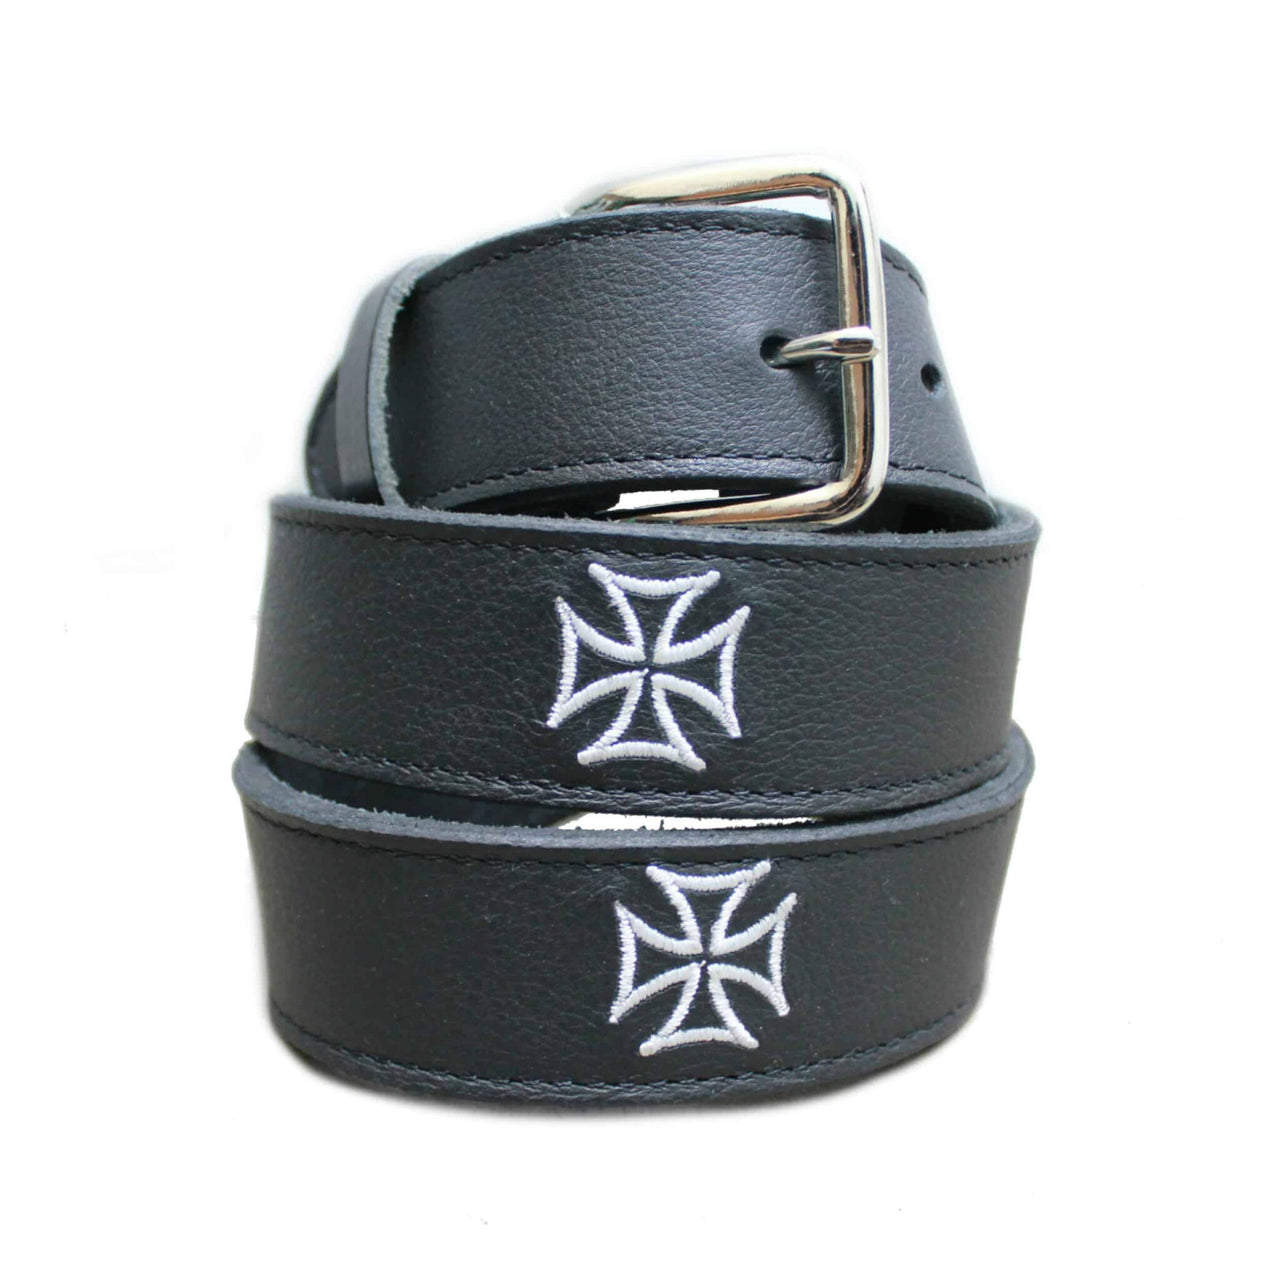 Iron Cross Embroidered Leather Belt